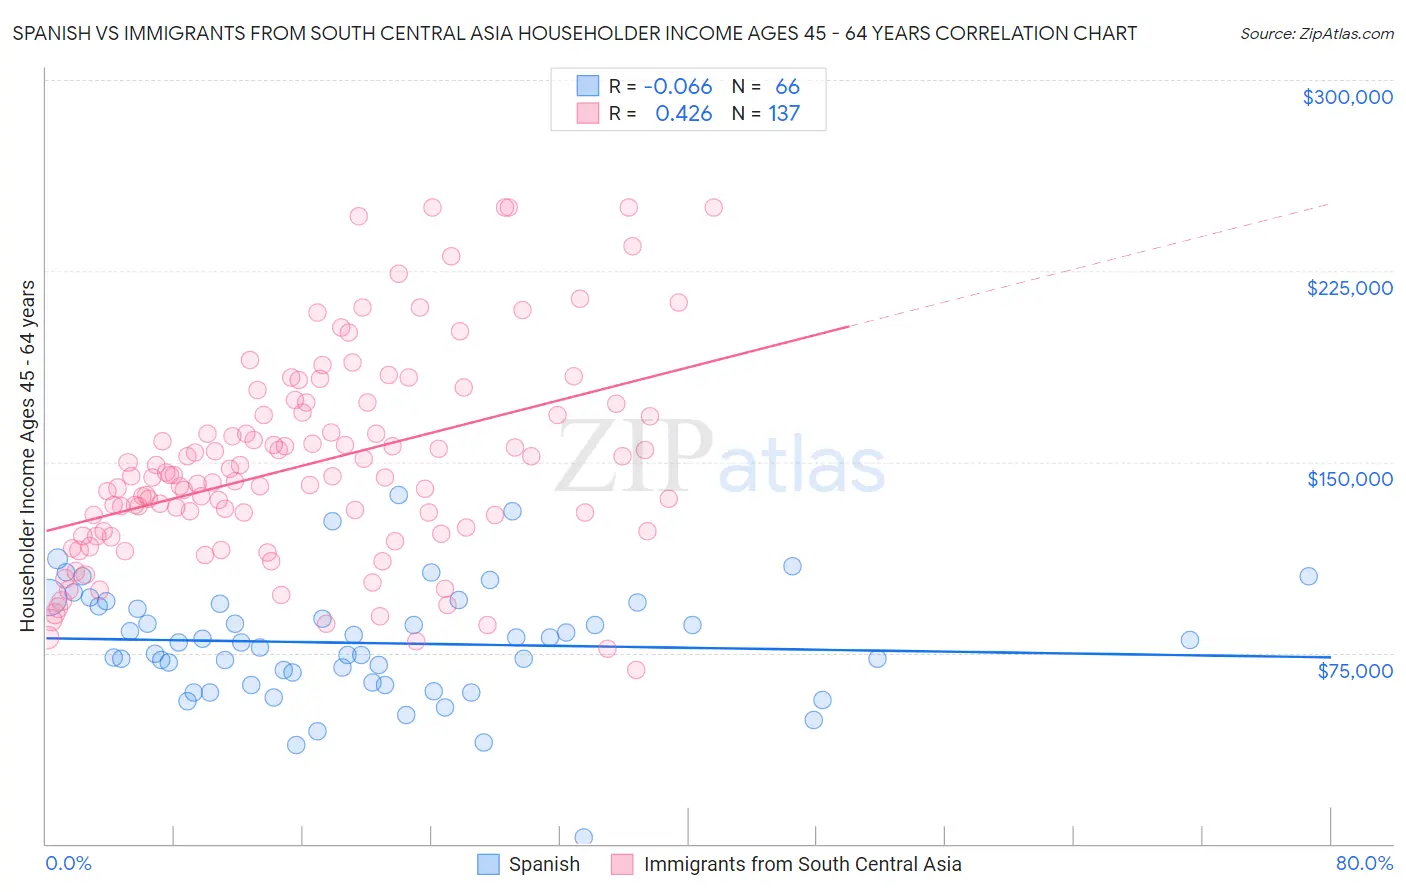 Spanish vs Immigrants from South Central Asia Householder Income Ages 45 - 64 years